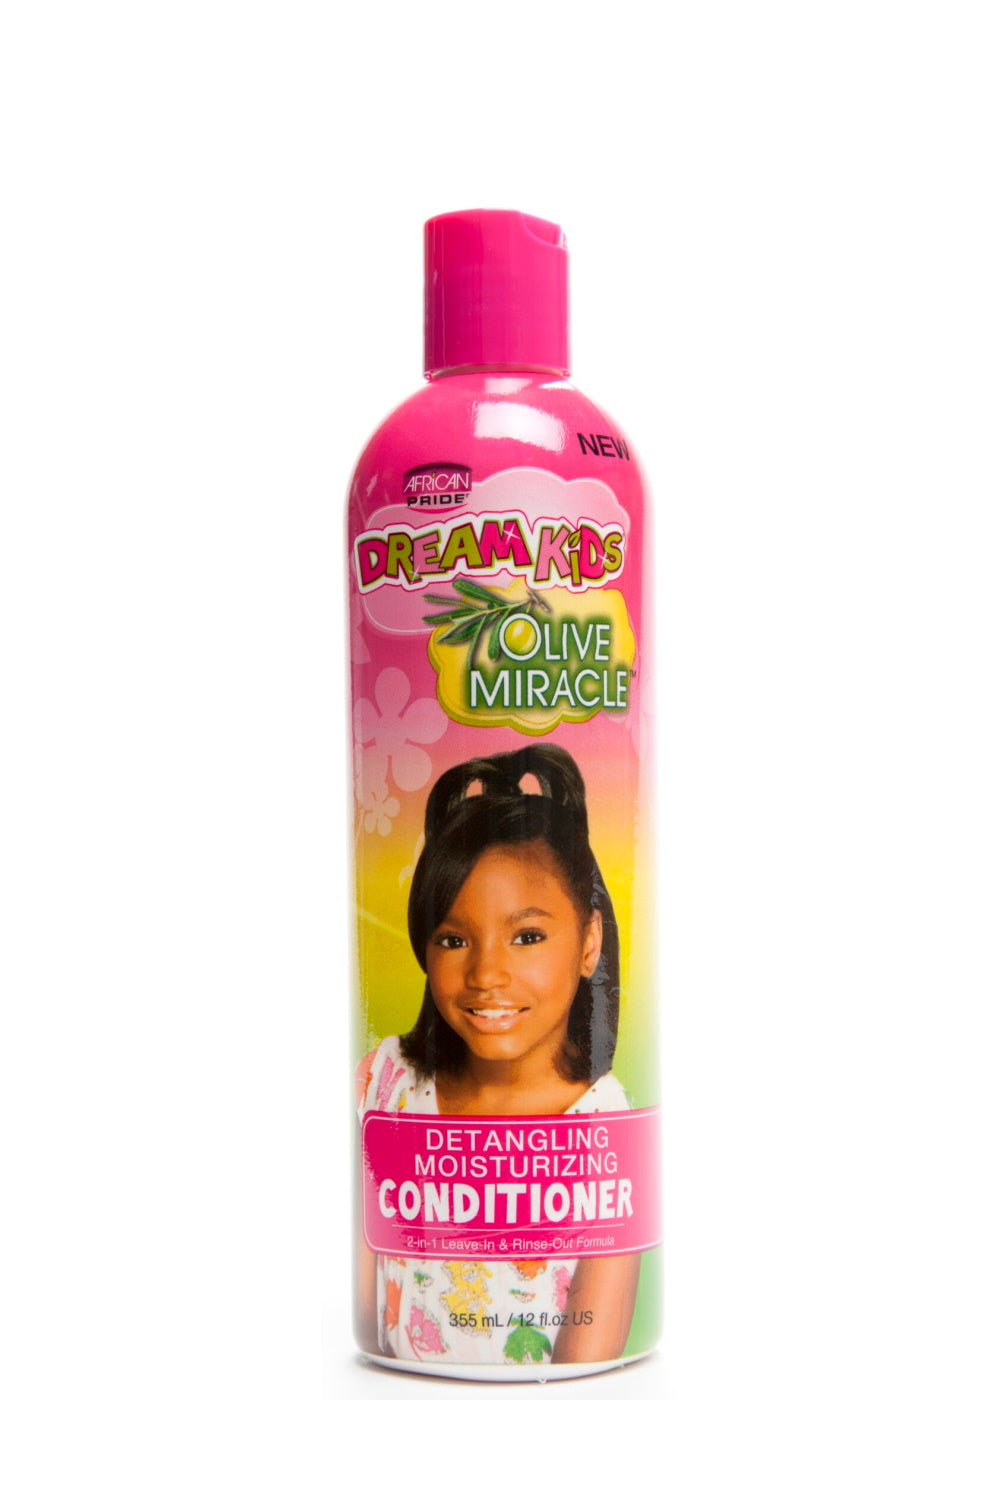 AFRICAN PRIDE DREAM KIDS OLIVE MIRACLE DETANGLING MOISTURIZING CONDITIONER 12oz